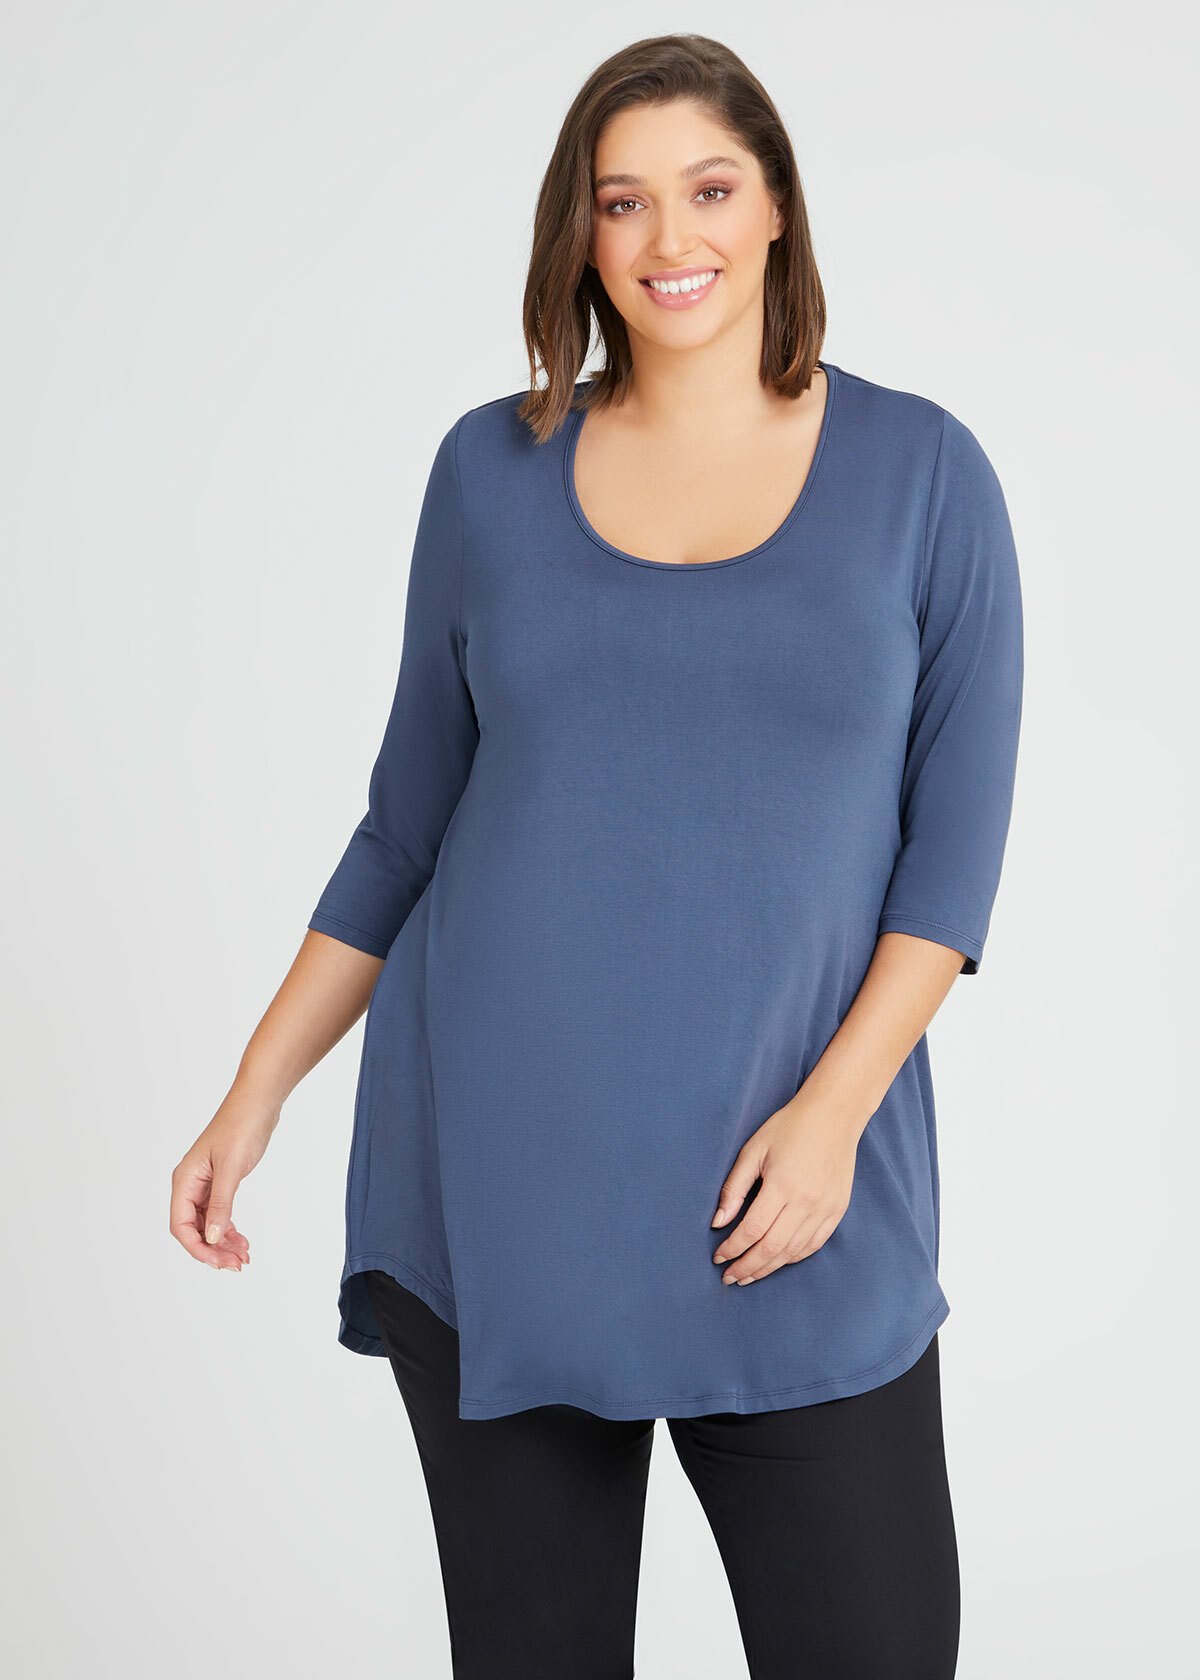 Shop Plus Size Bamboo Base 3/4 Sleeve Top in Black | Sizes 12-30 ...